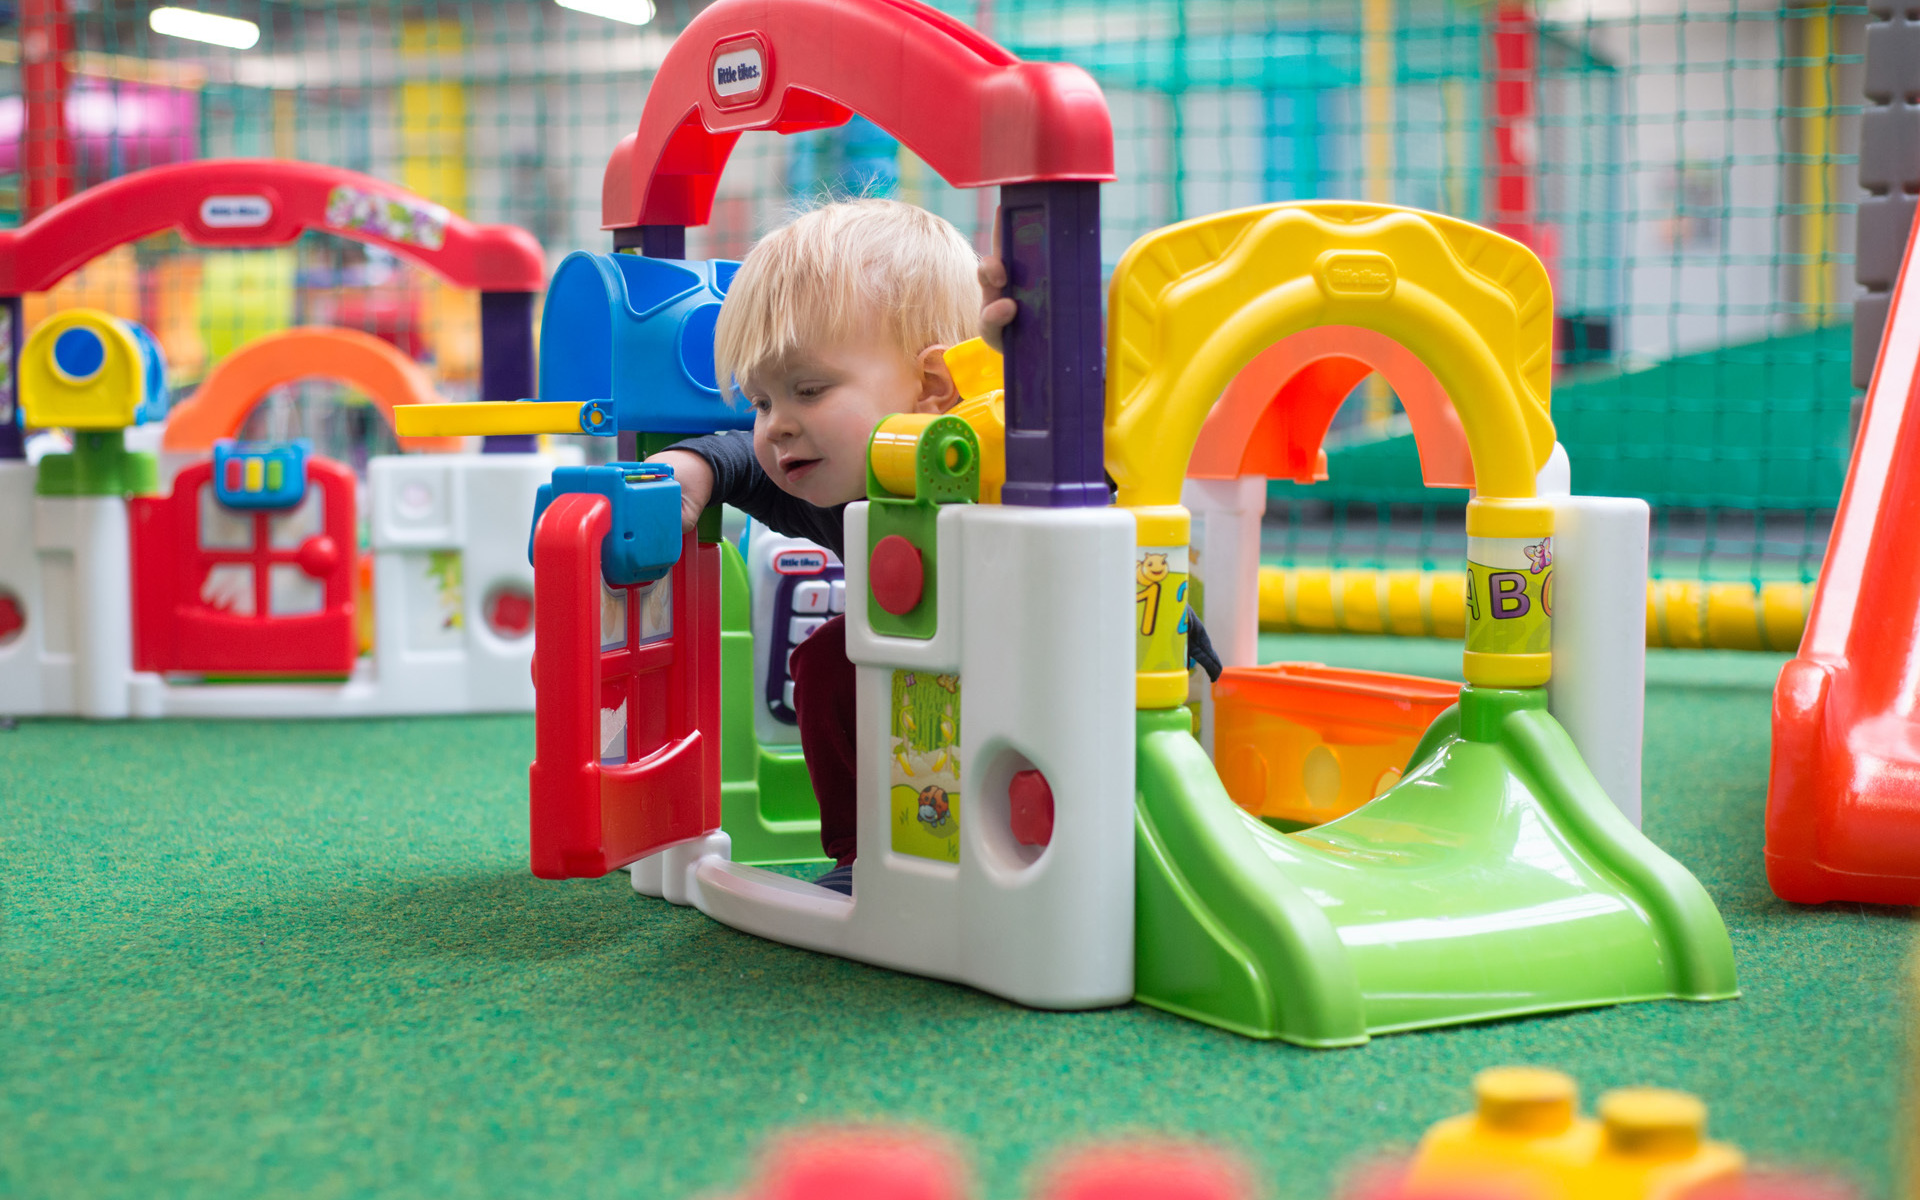 Toddler with play equipment